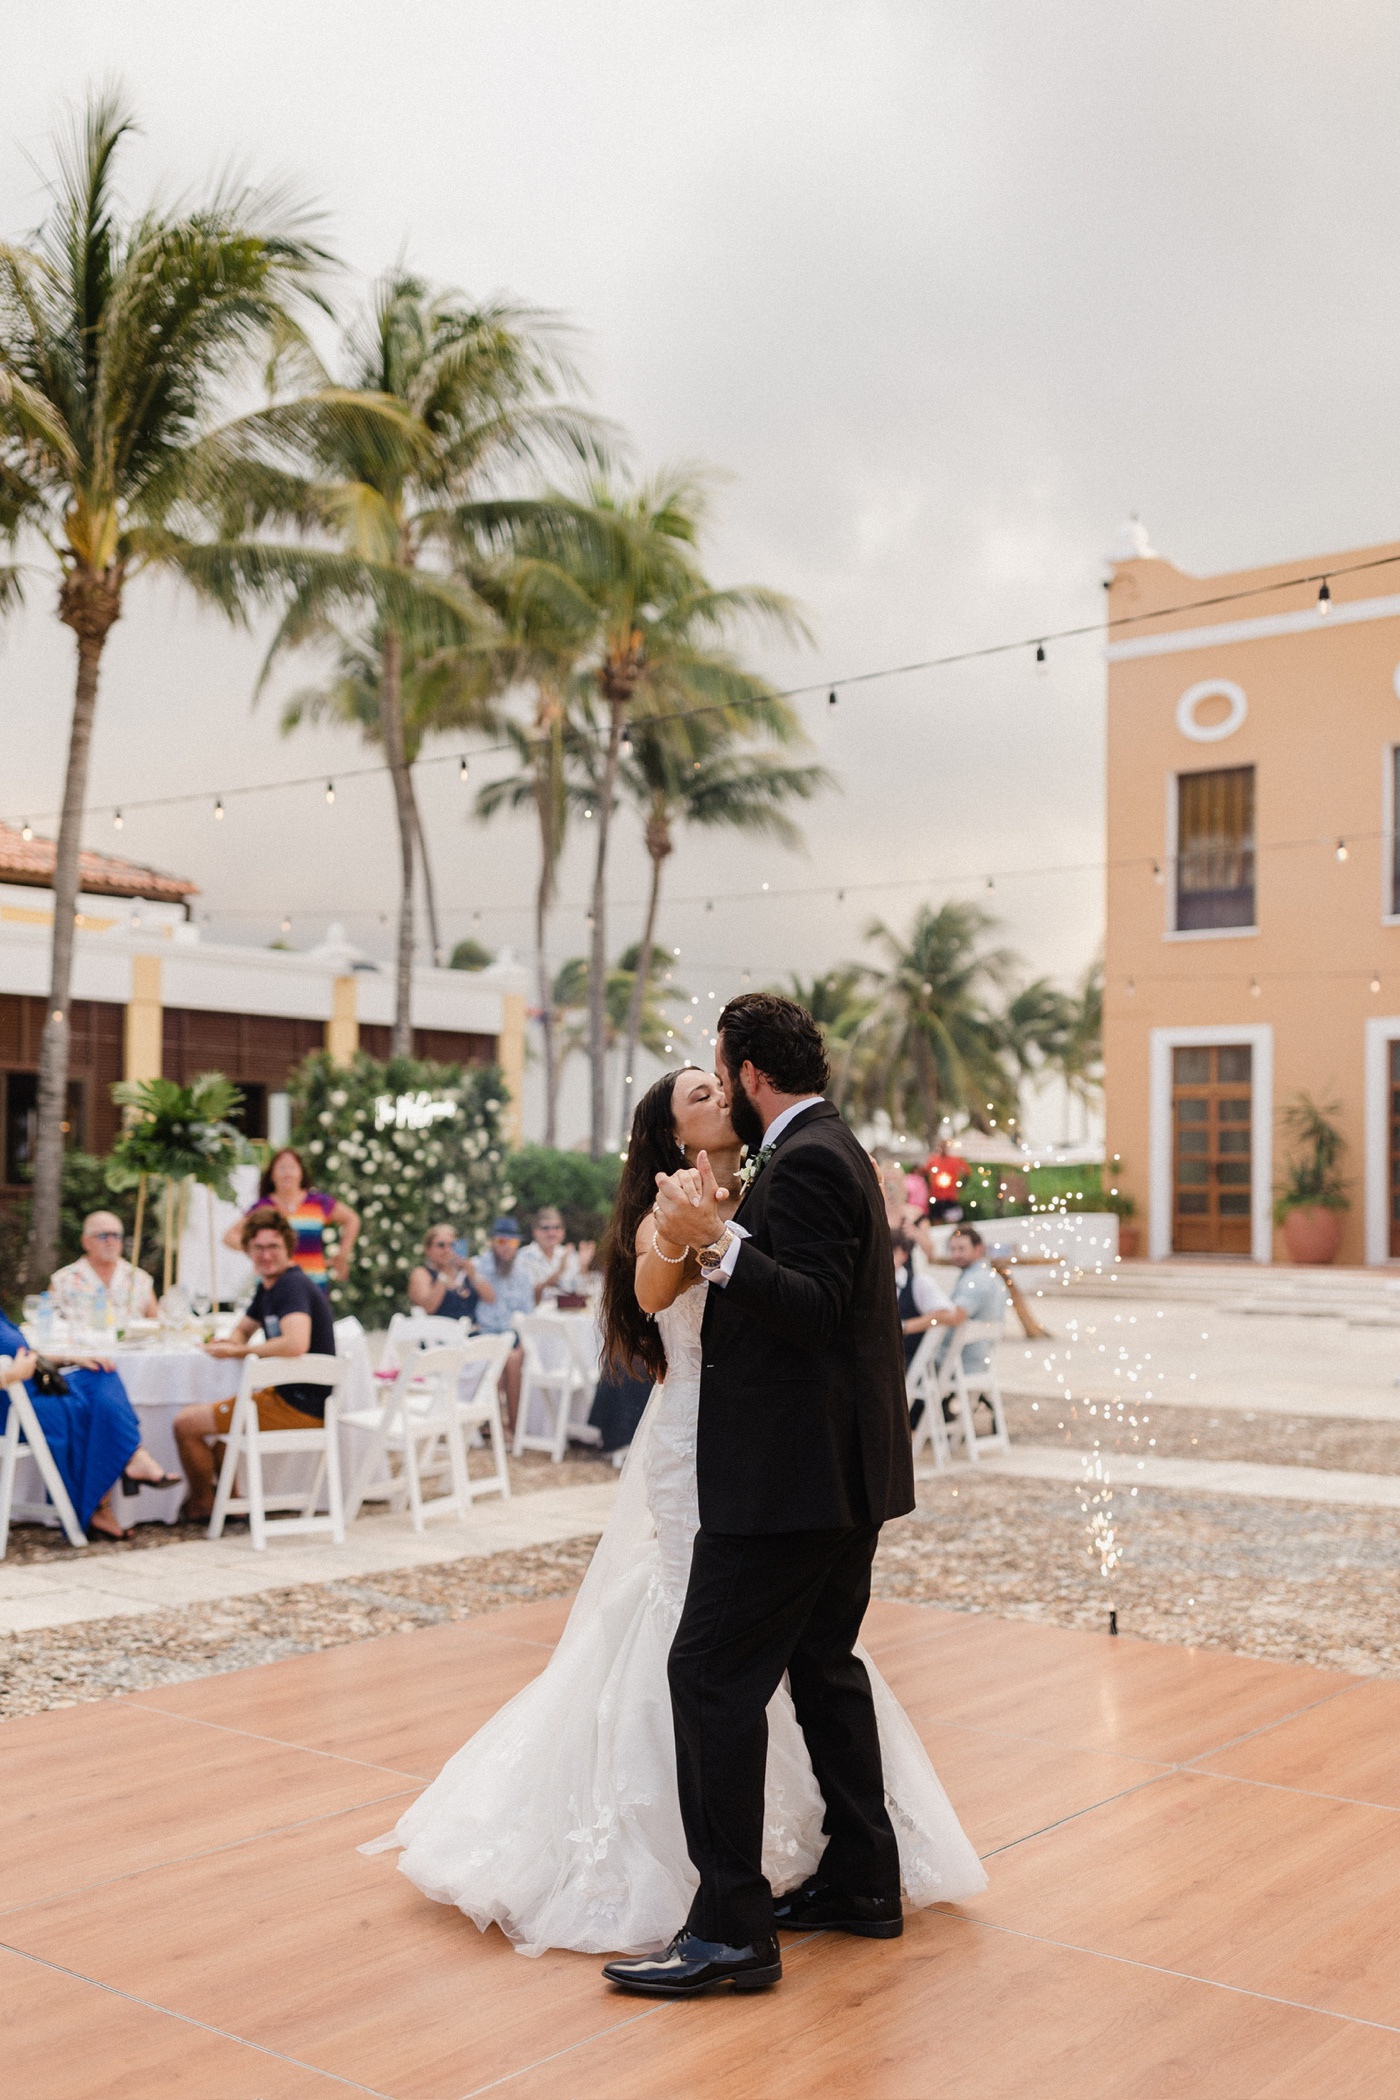 Wedding reception in the Mexican Plaza at Dreams Tulum